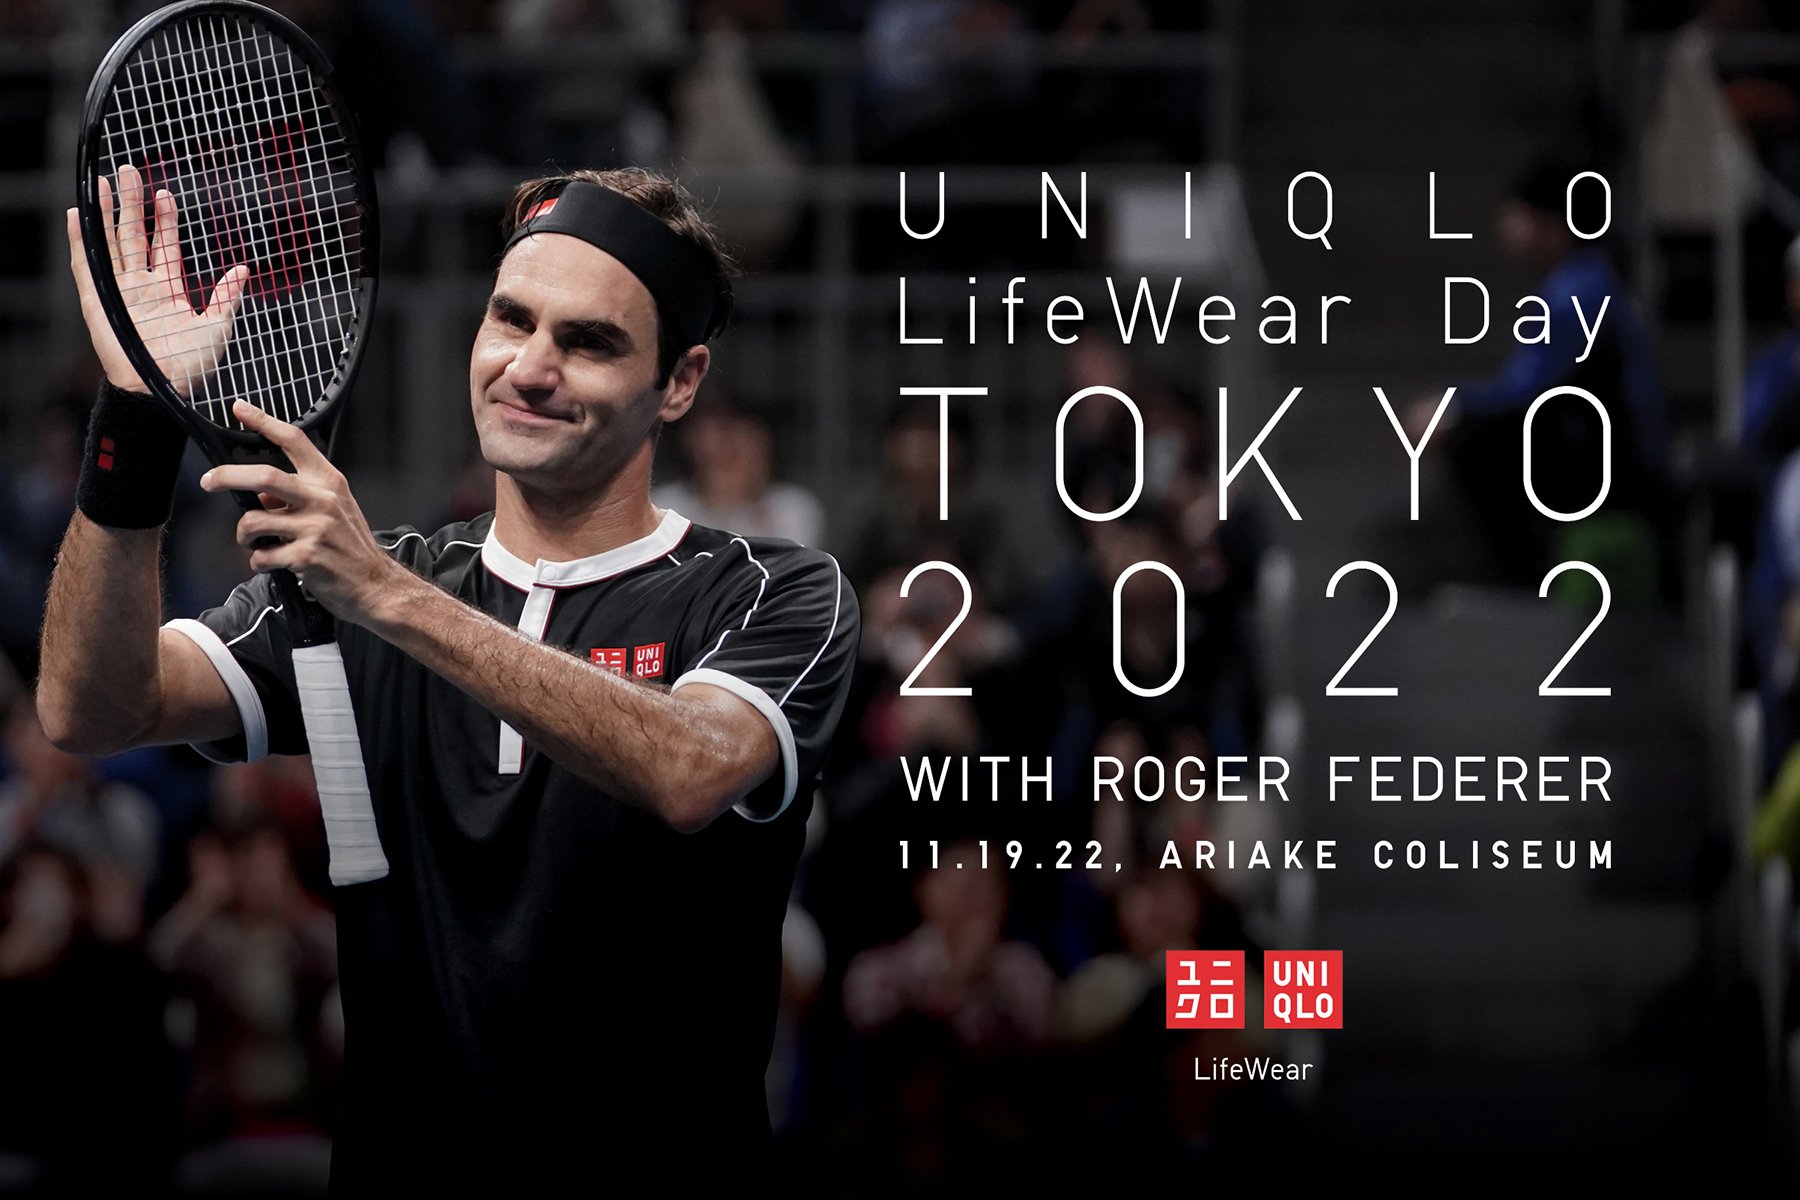 hoofdstuk stopcontact Rennen UNIQLO To Hold LifeWear Day in Tokyo with Roger Federer, Global Sporting  Icon, on November 19th - Event to Also Feature Kei Nishikori, Shingo  Kunieda, and Gordon Reid | FAST RETAILING CO., LTD.